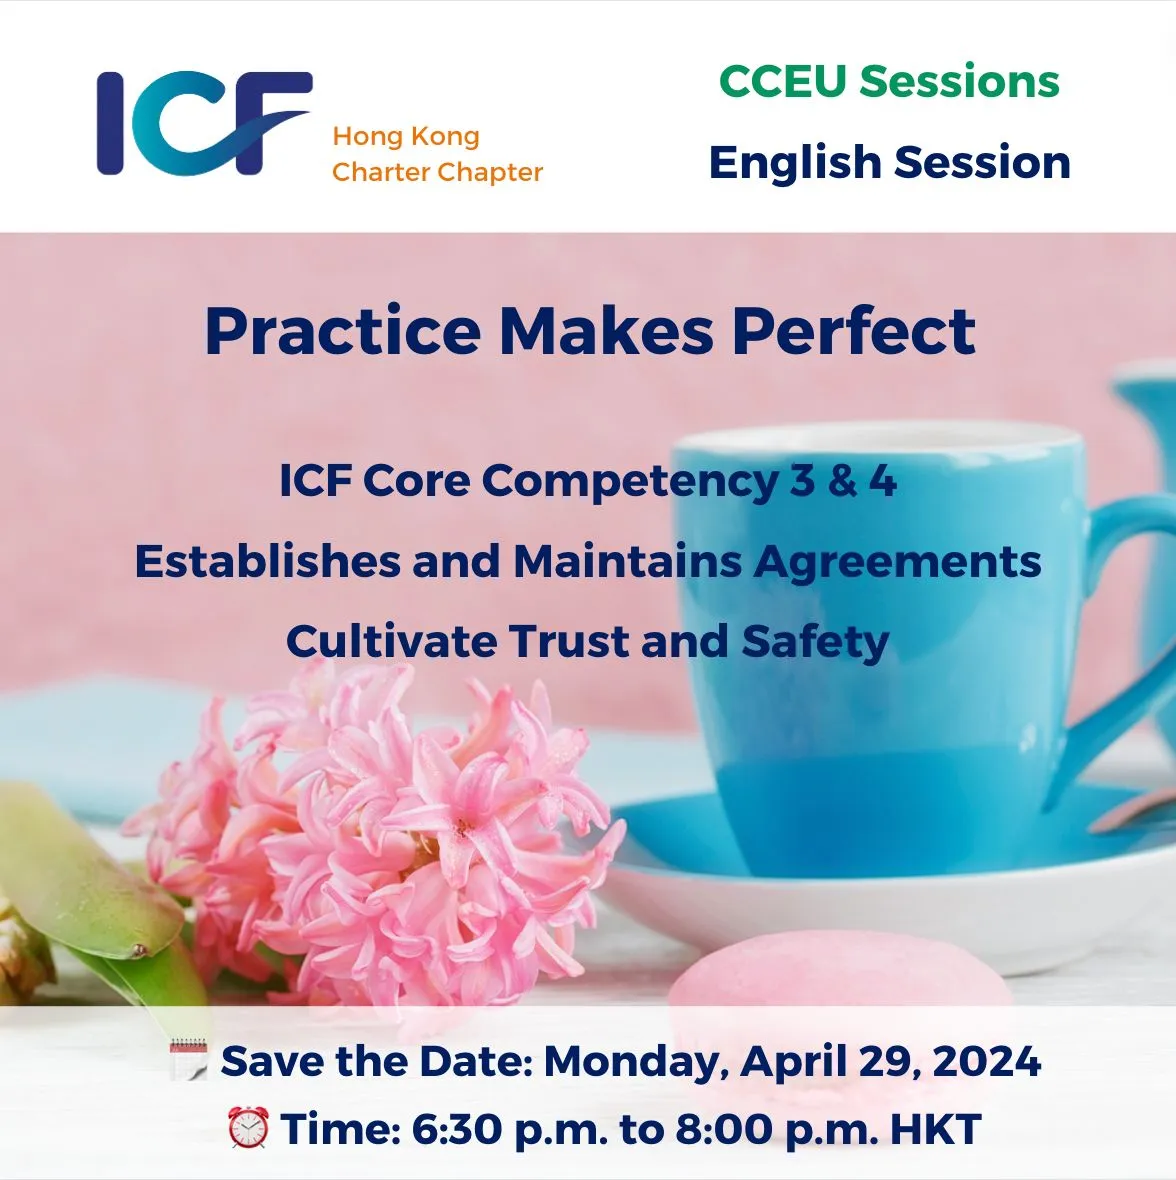 Master our ICF competencies #3 and #4